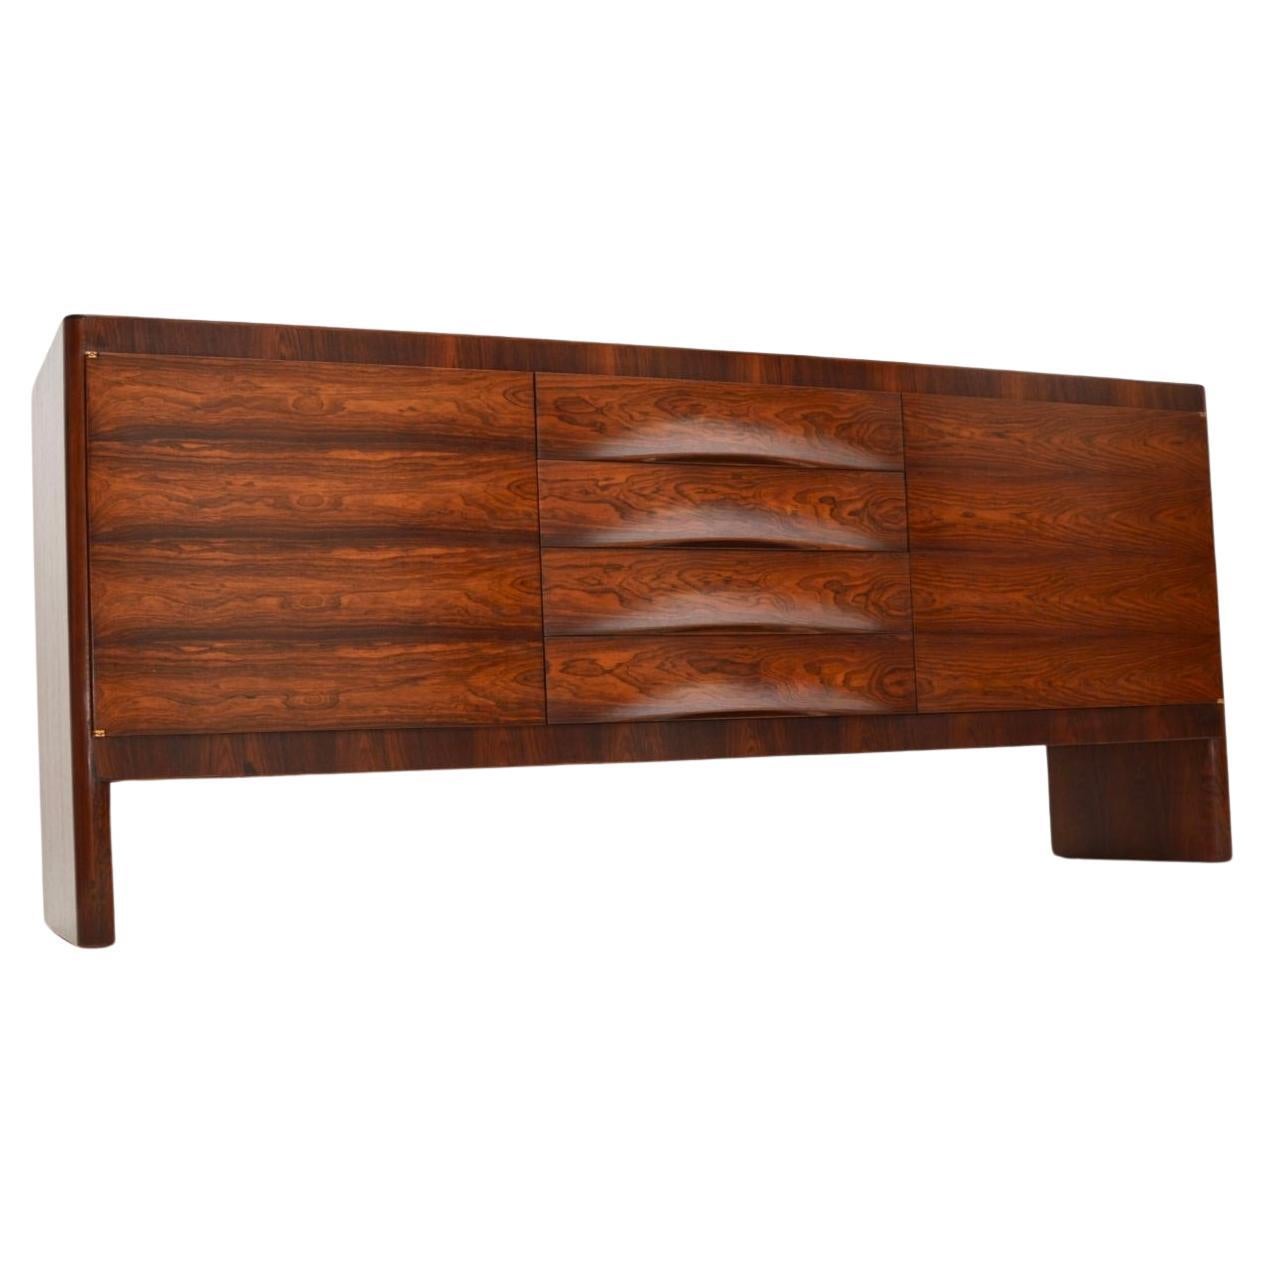 Vintage Sideboard by Gordon Russell